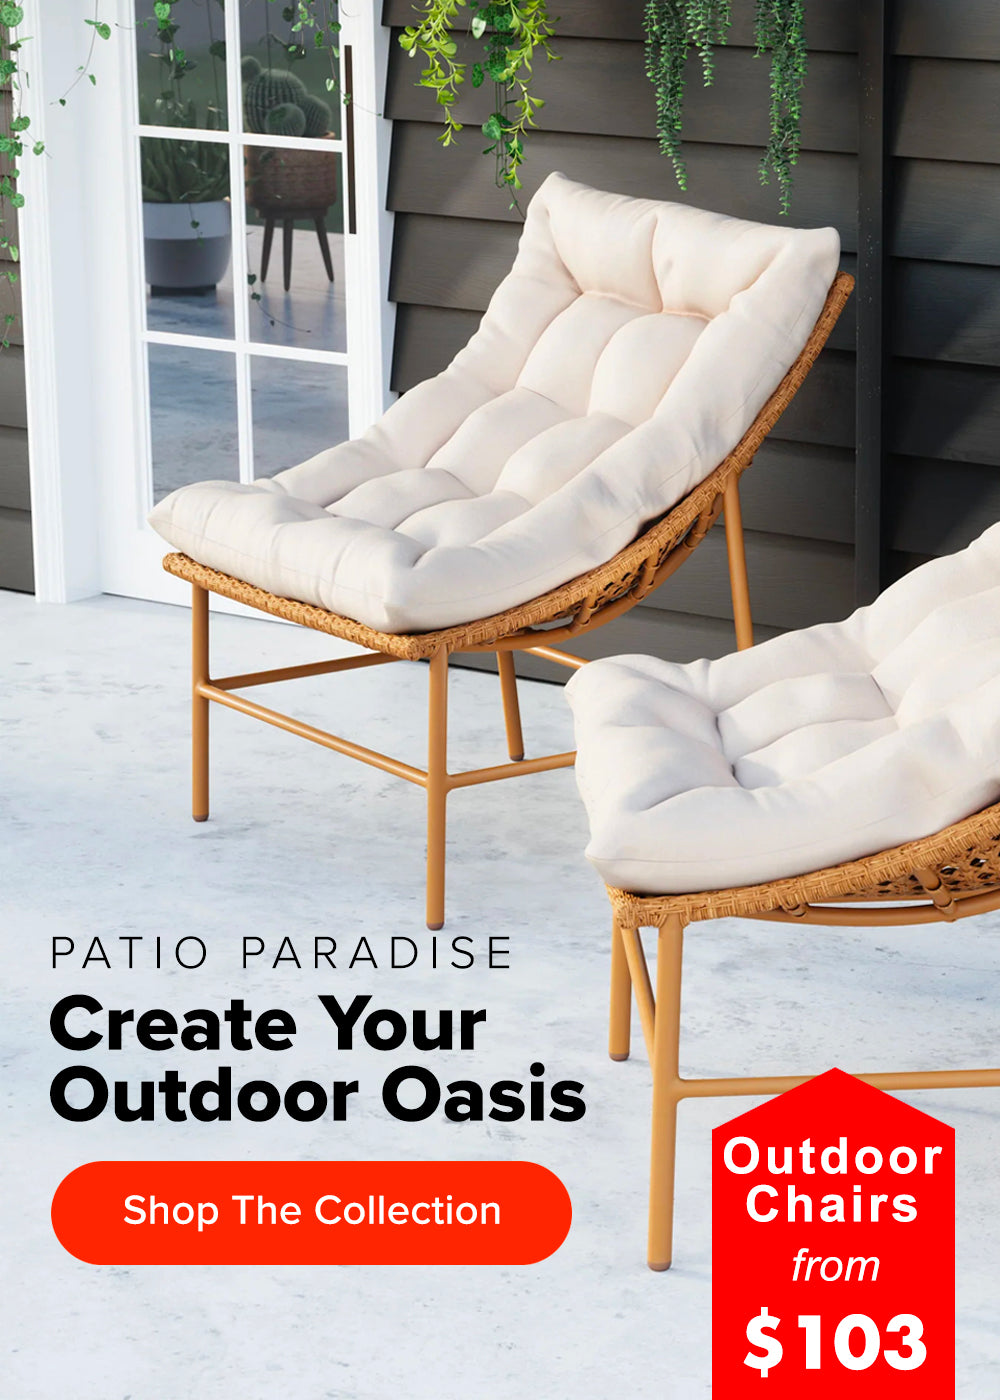 Patio Paradise - Create Your Outdoor Oasis